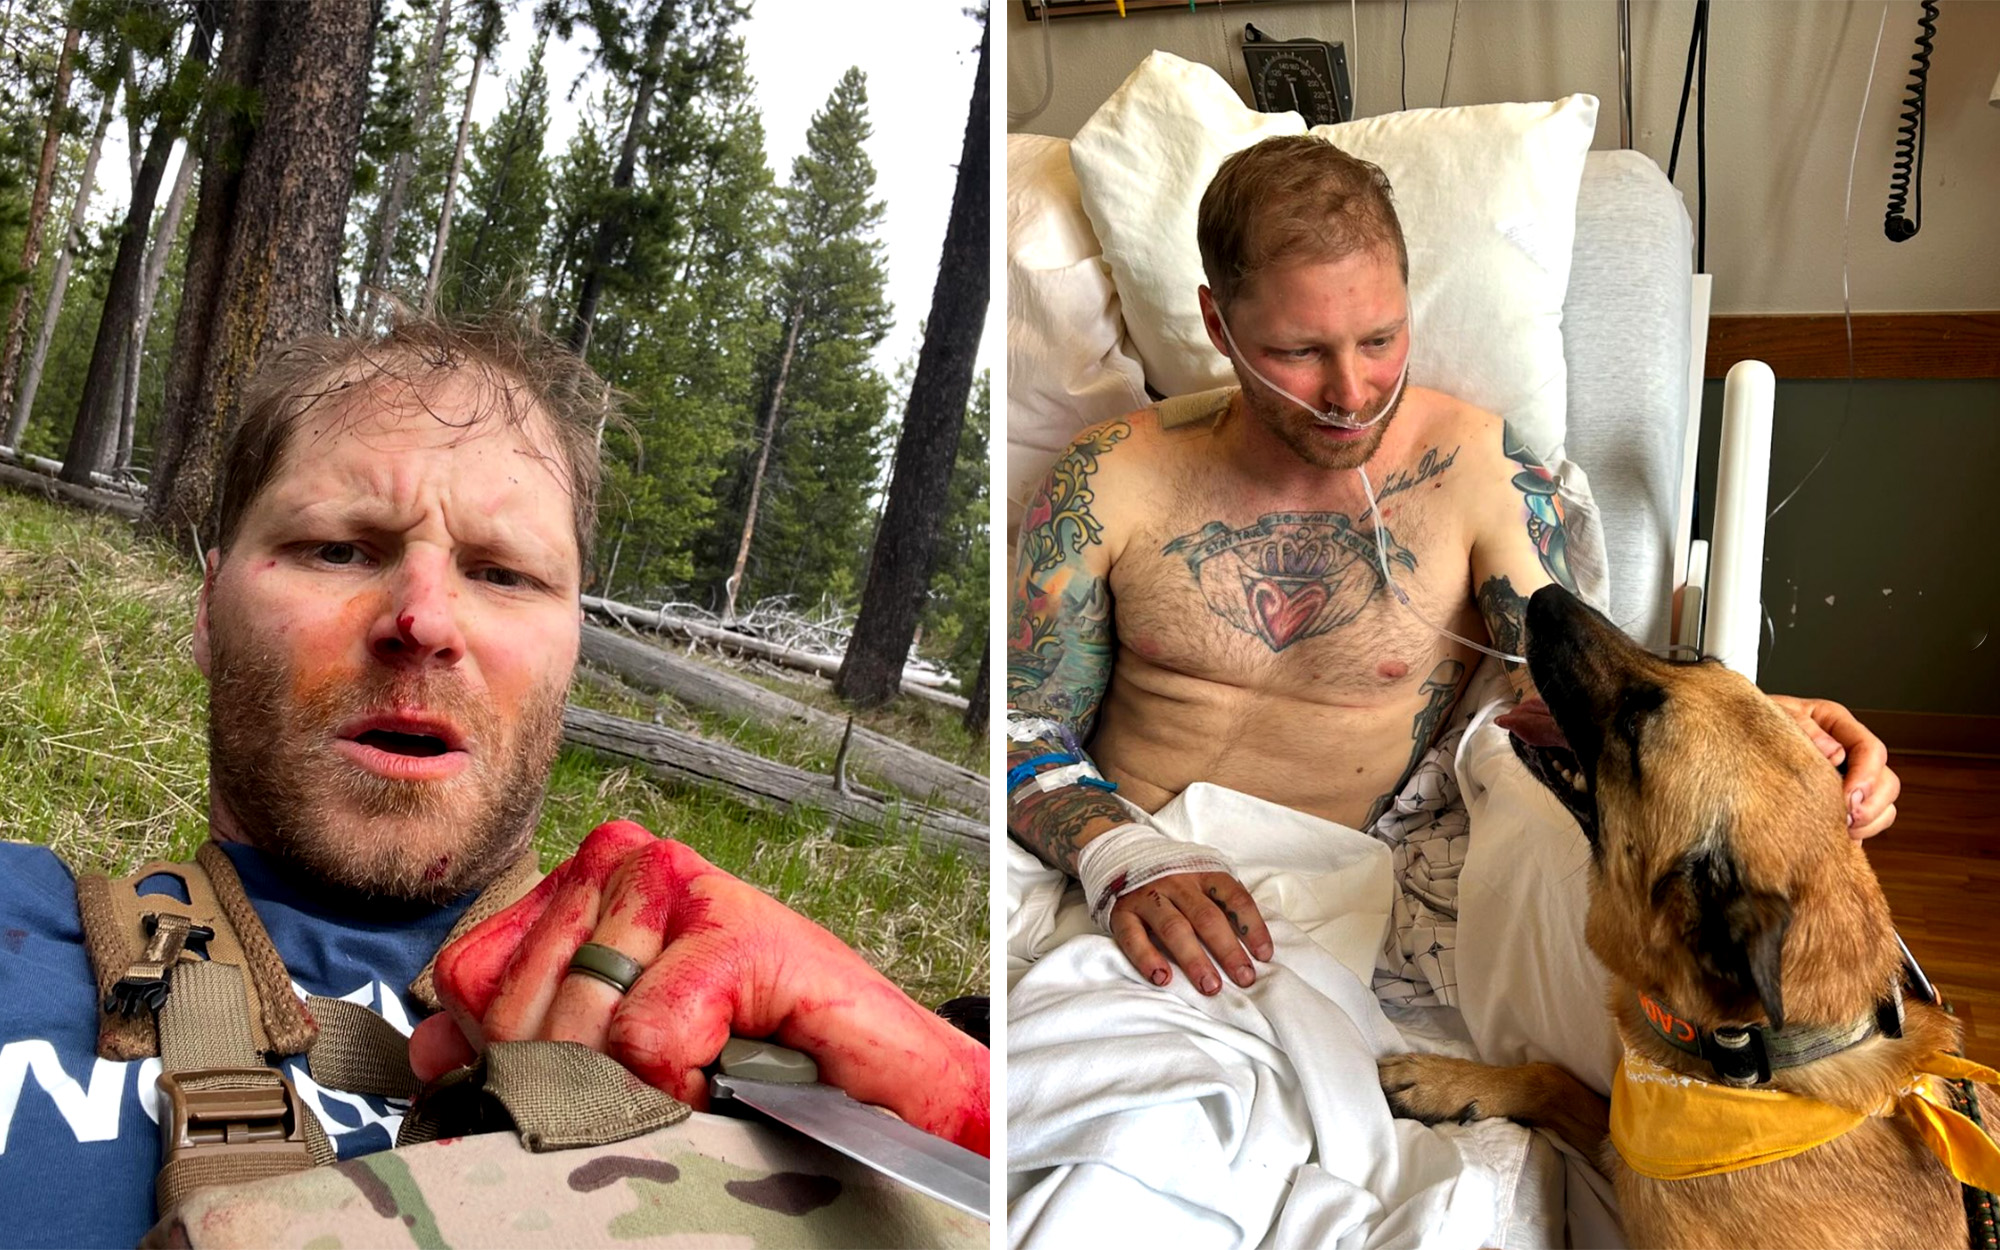 Grizzly bear attack victim in the woods and in the hospital.